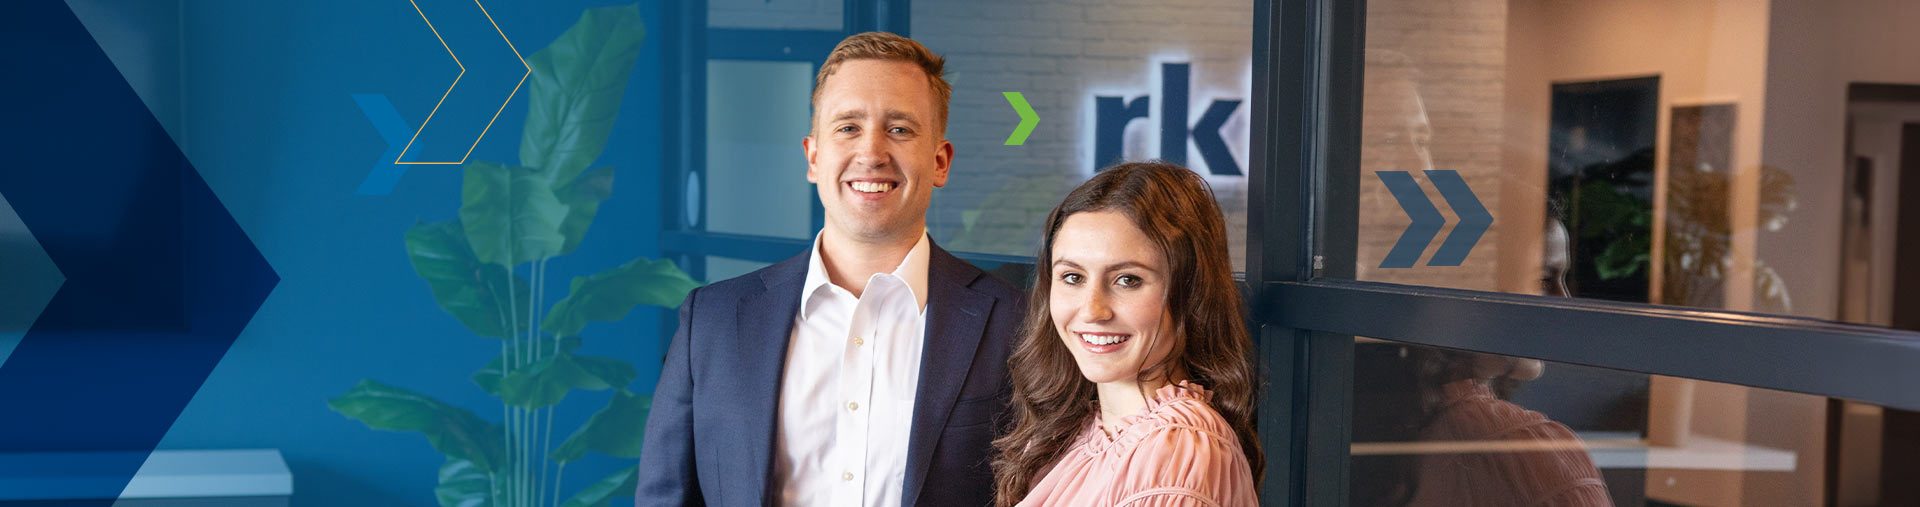 RKL Young Professionals Hero Image